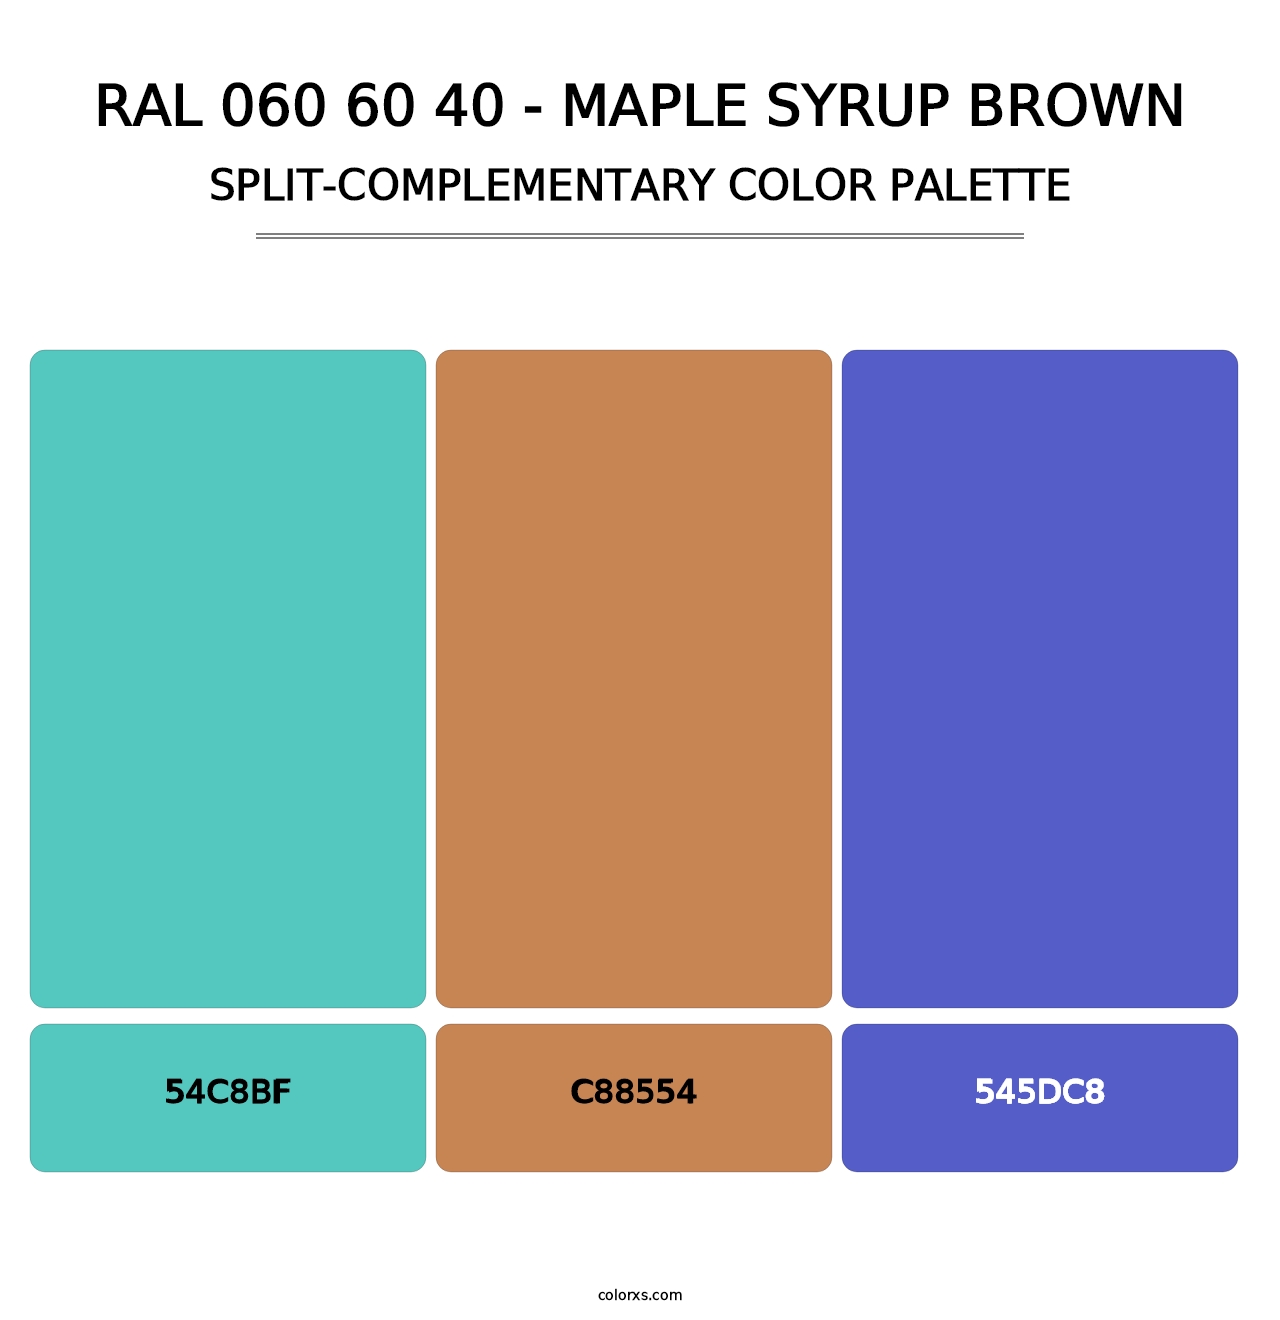 RAL 060 60 40 - Maple Syrup Brown - Split-Complementary Color Palette